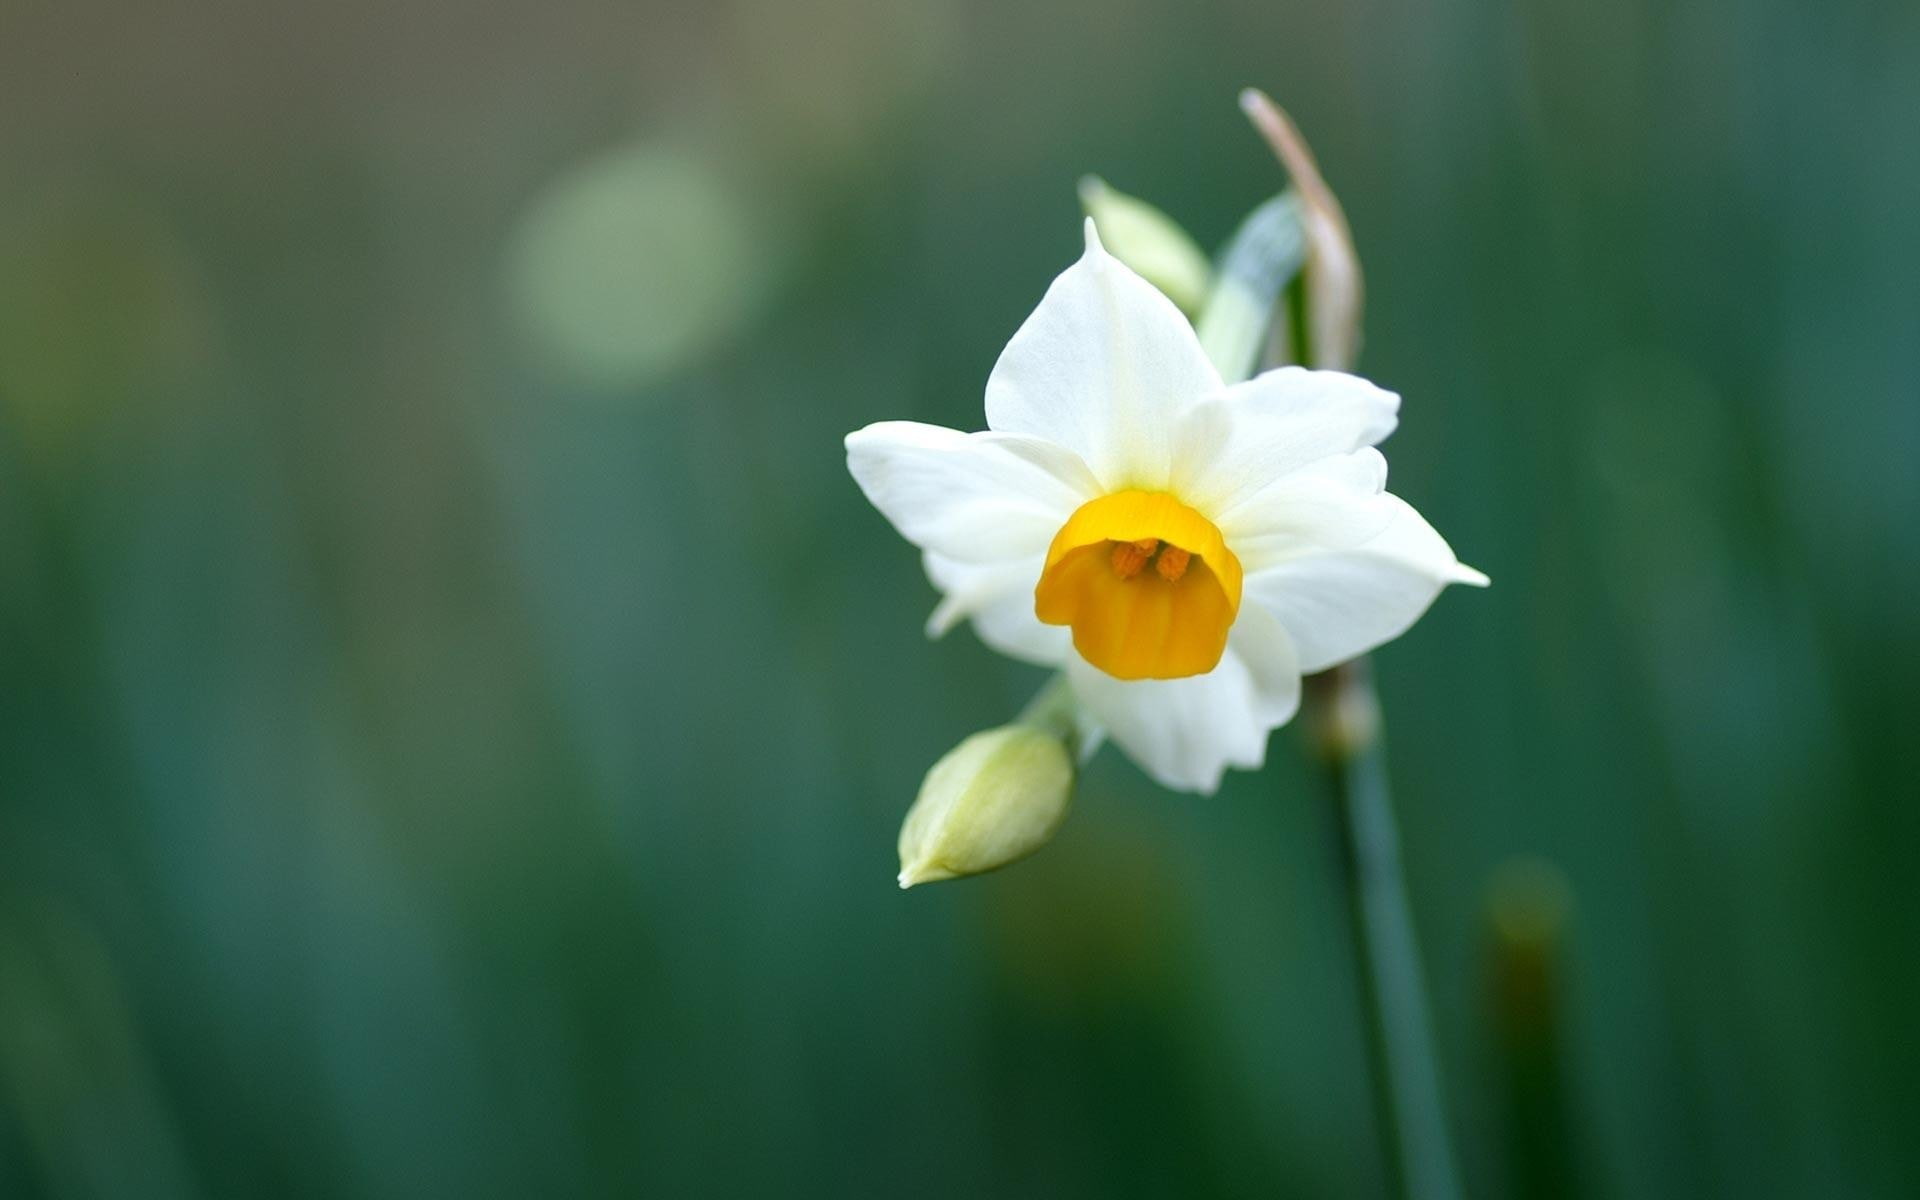 daffodil narcissus-Flowers HD Wallpaper, white and yellow Narcissus pseudonarcissus flower